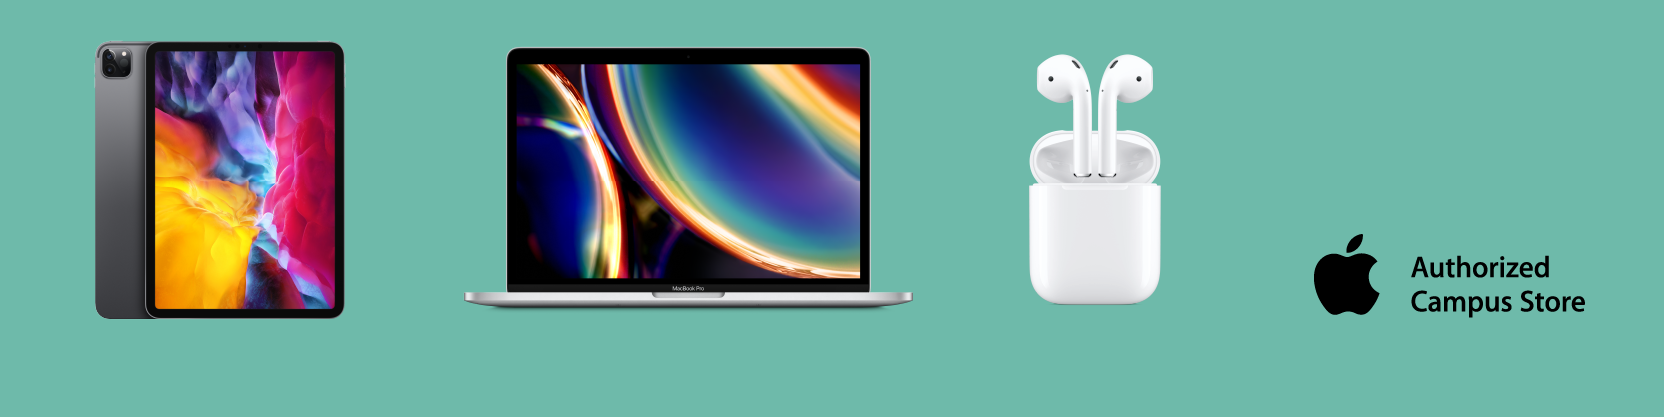 Apple's Back to School promo is back with discounts on Macs and iPads, free  AirPods, and more 